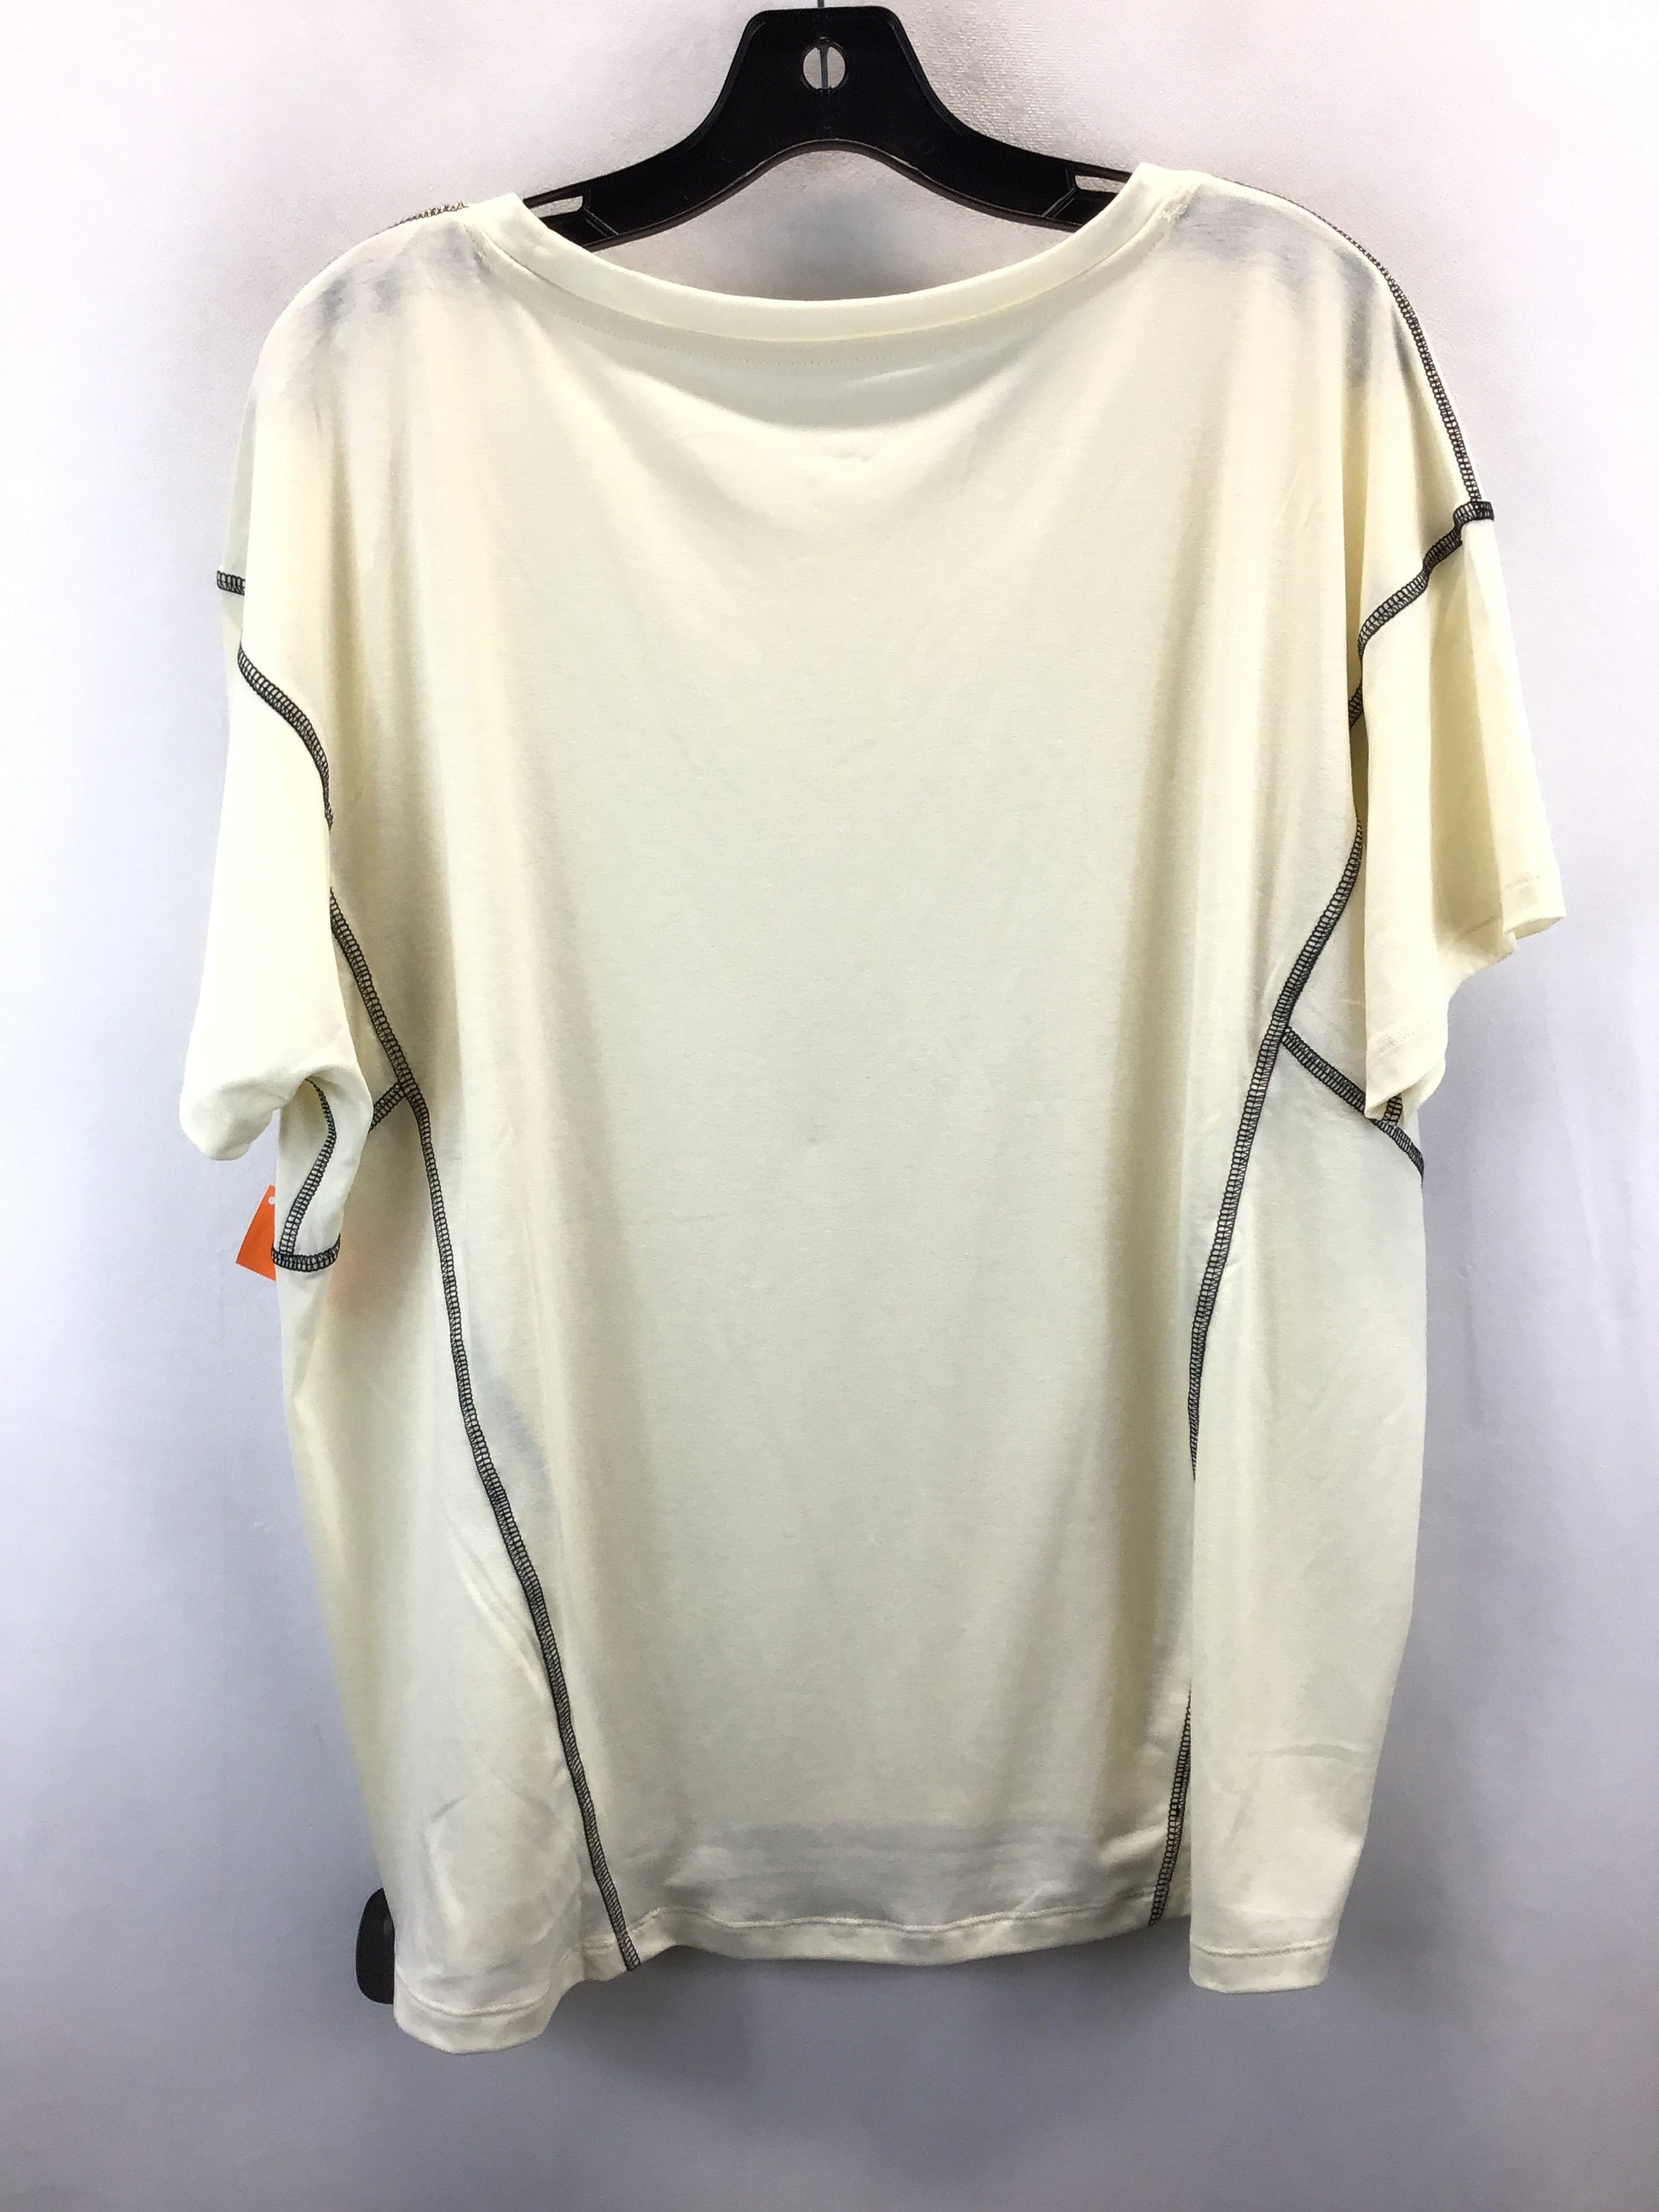 Yellow Top Short Sleeve Basic Lou And Grey, Size L – Clothes Mentor